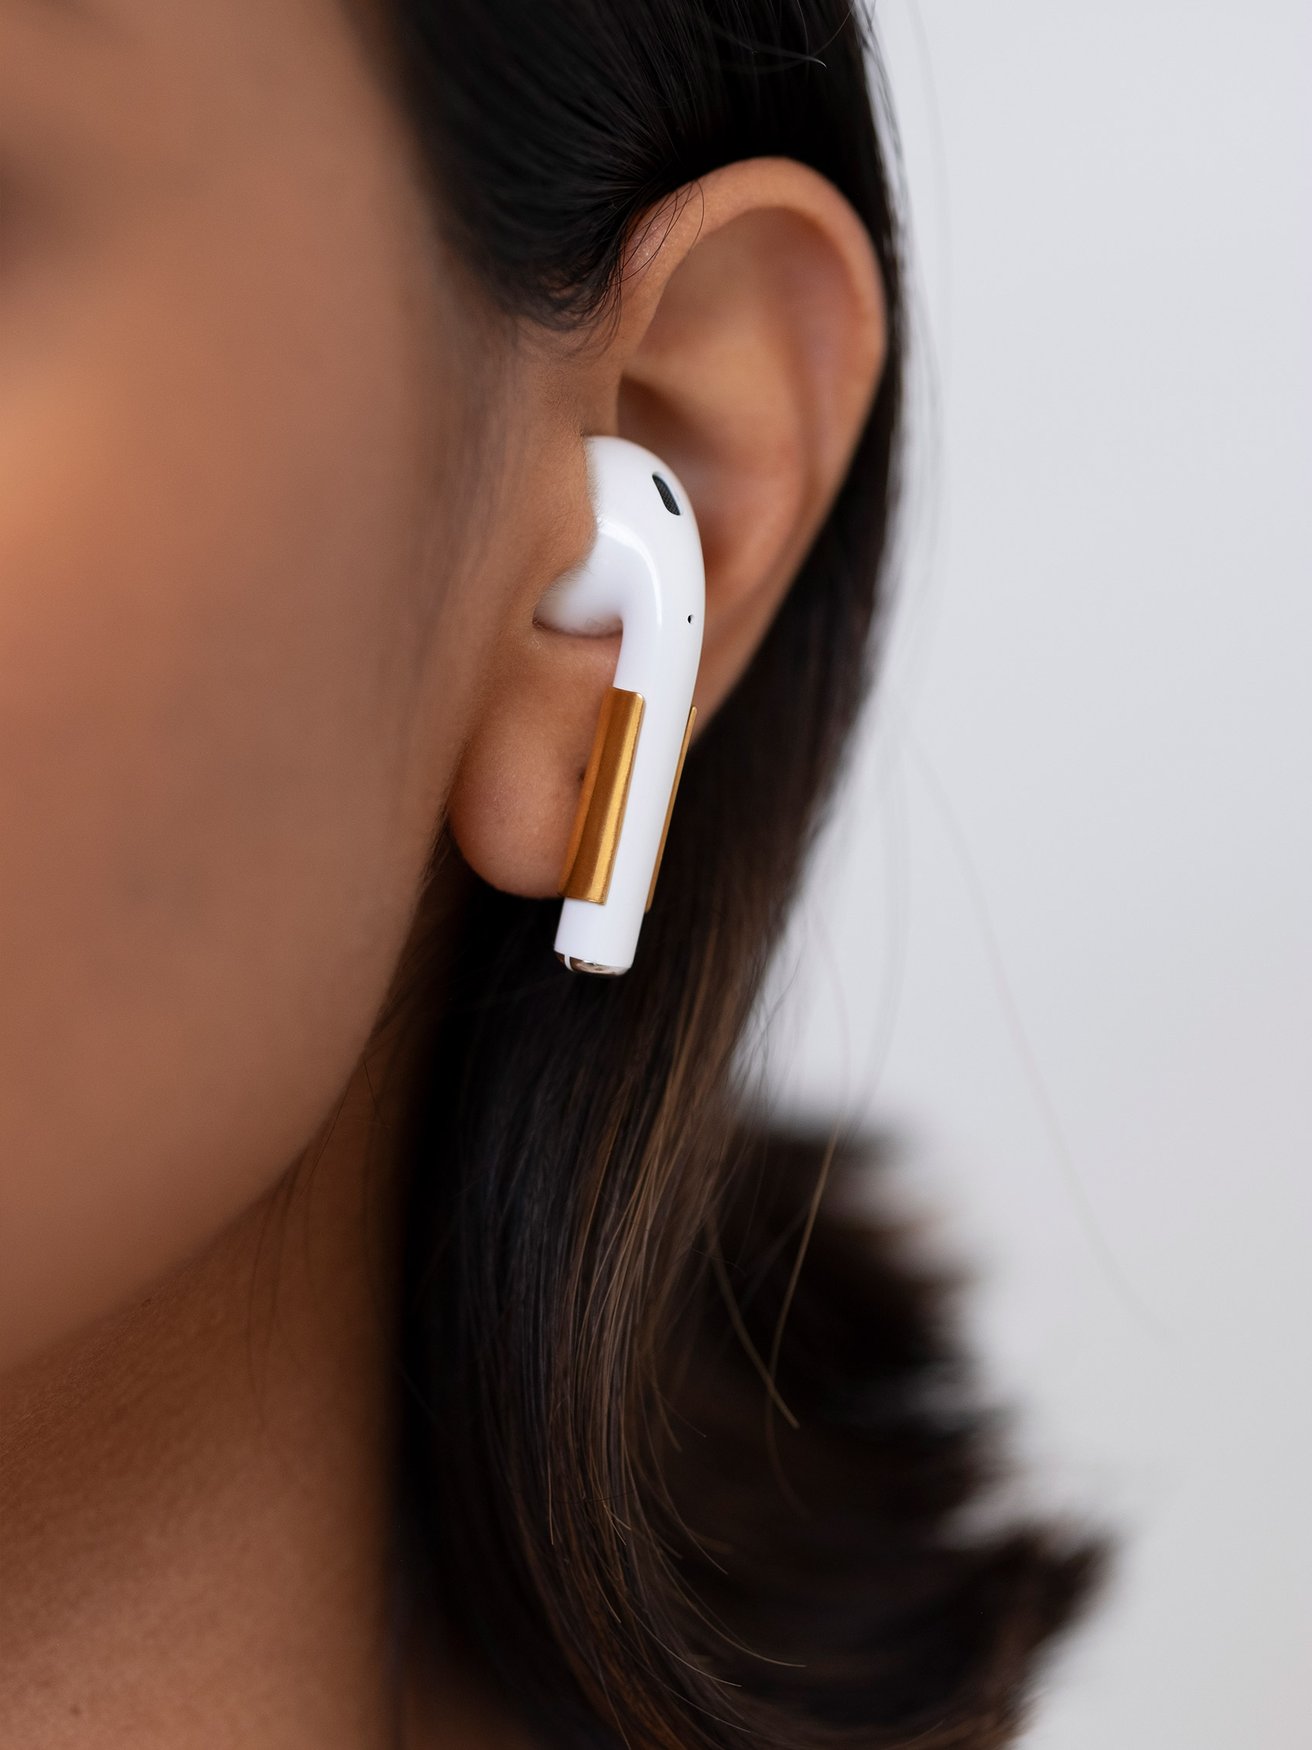 Airpods-5